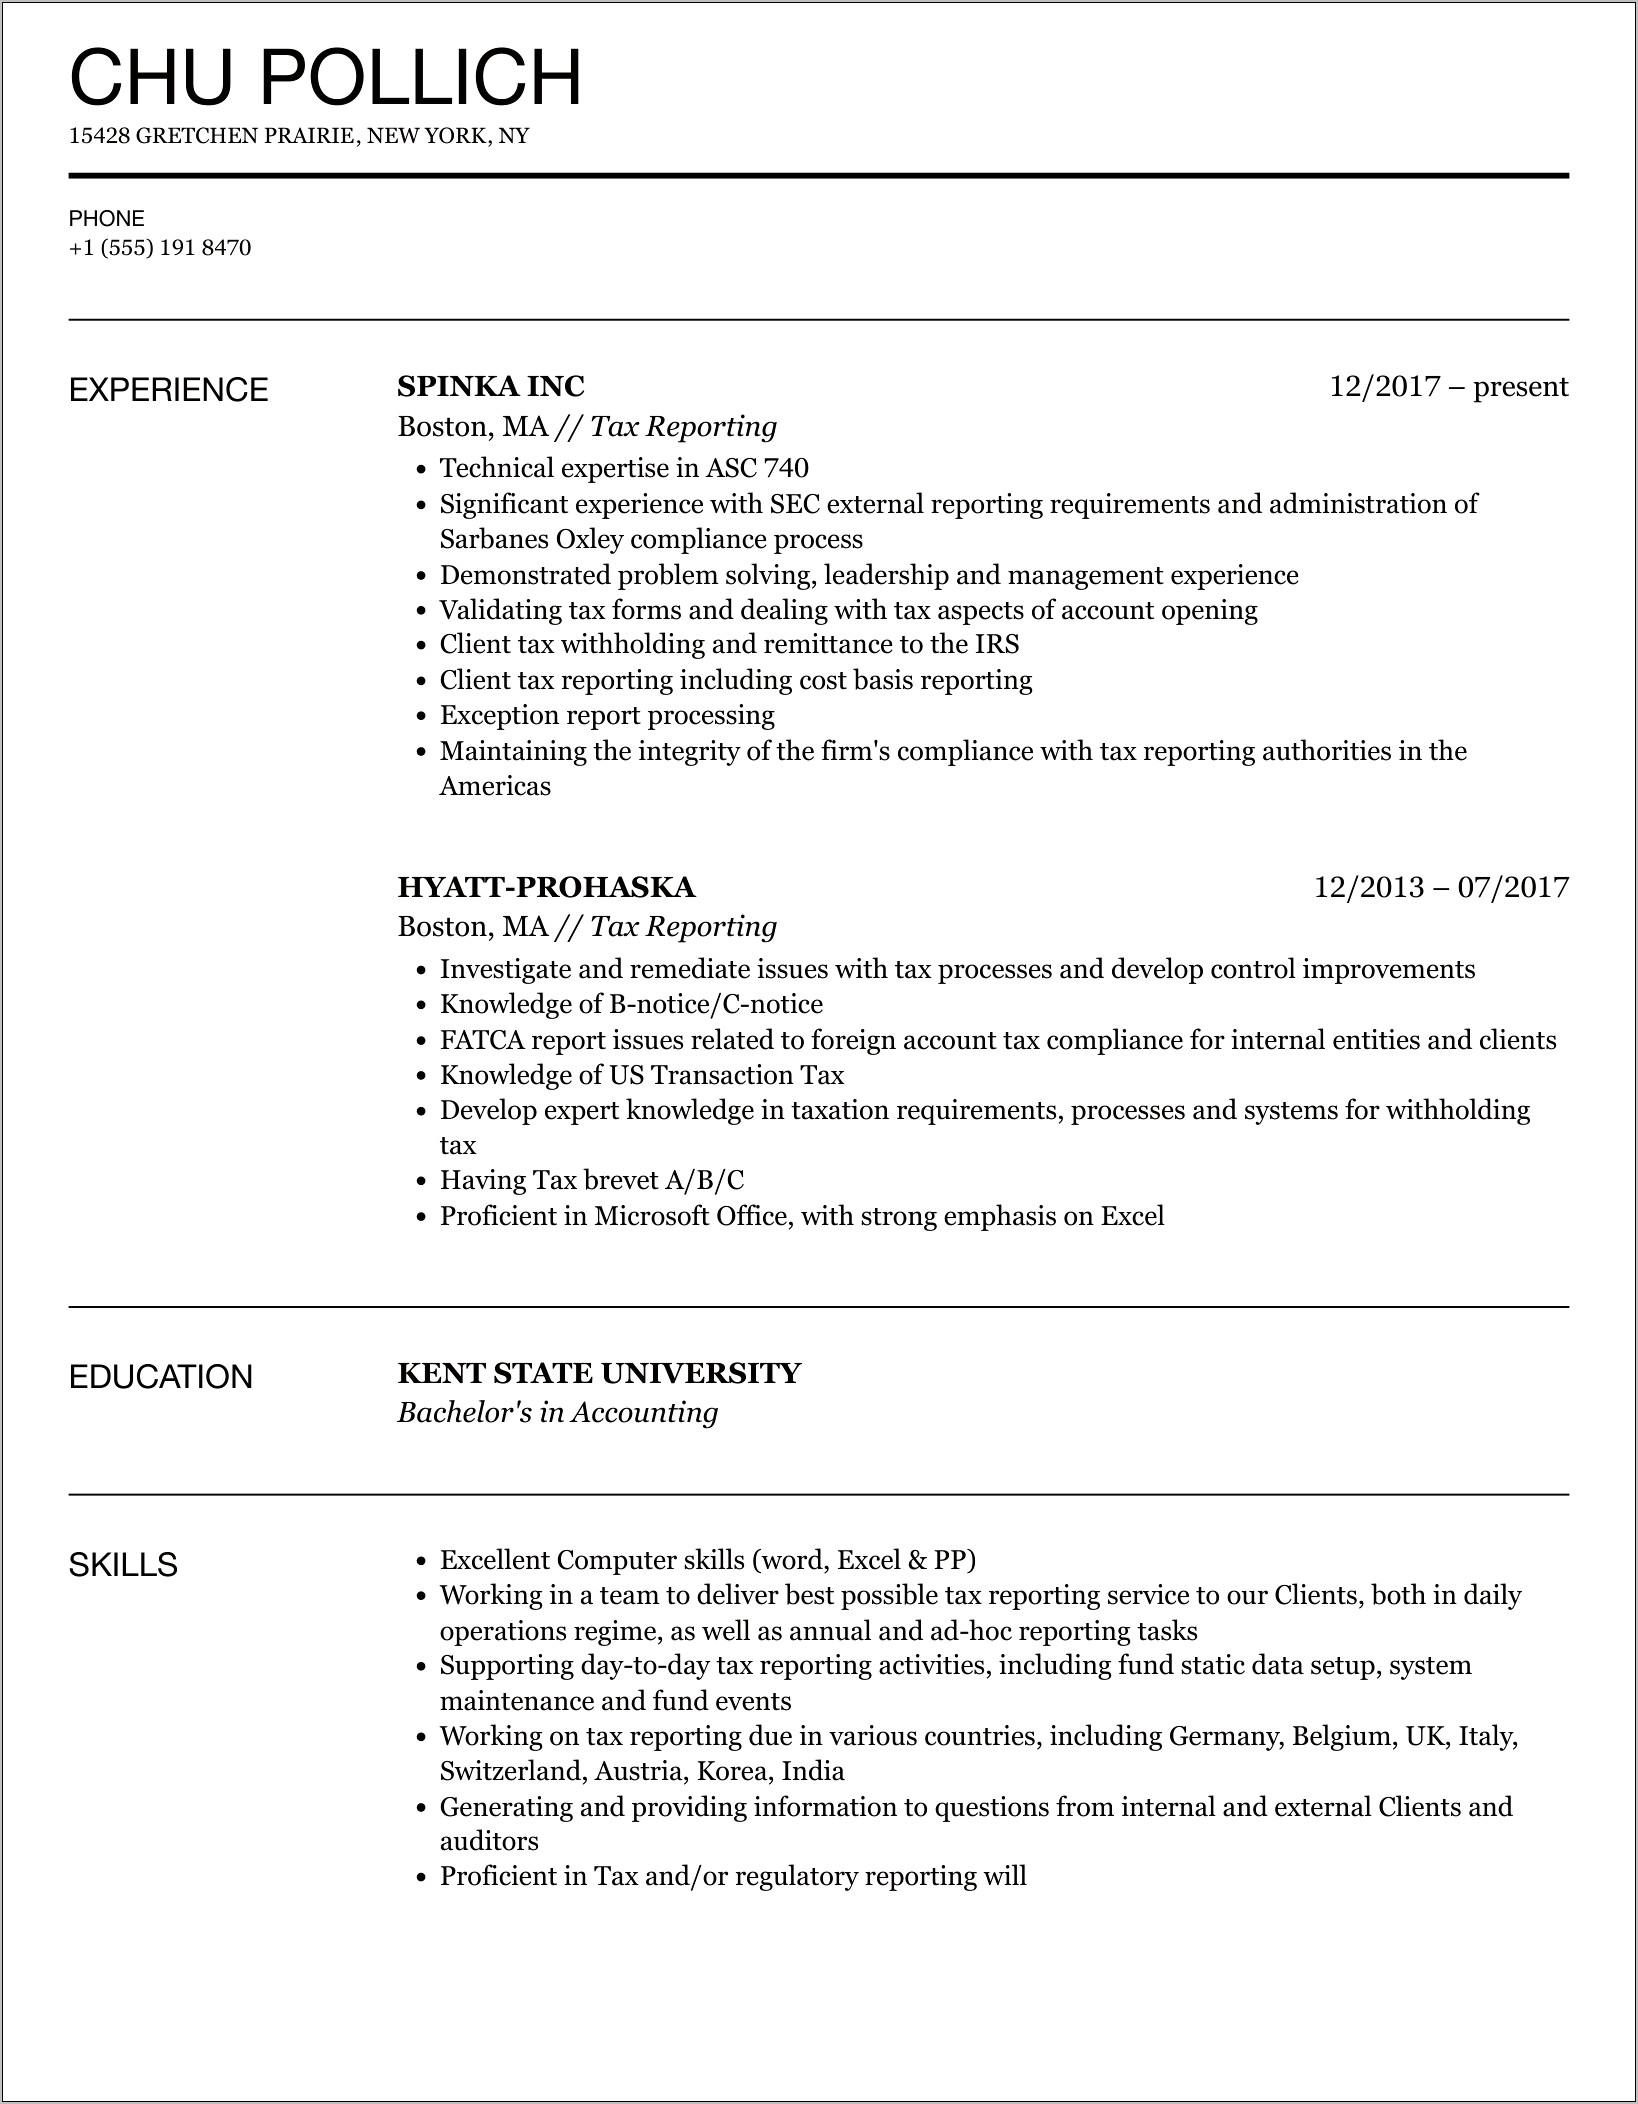 Resume Sample With Itin Number